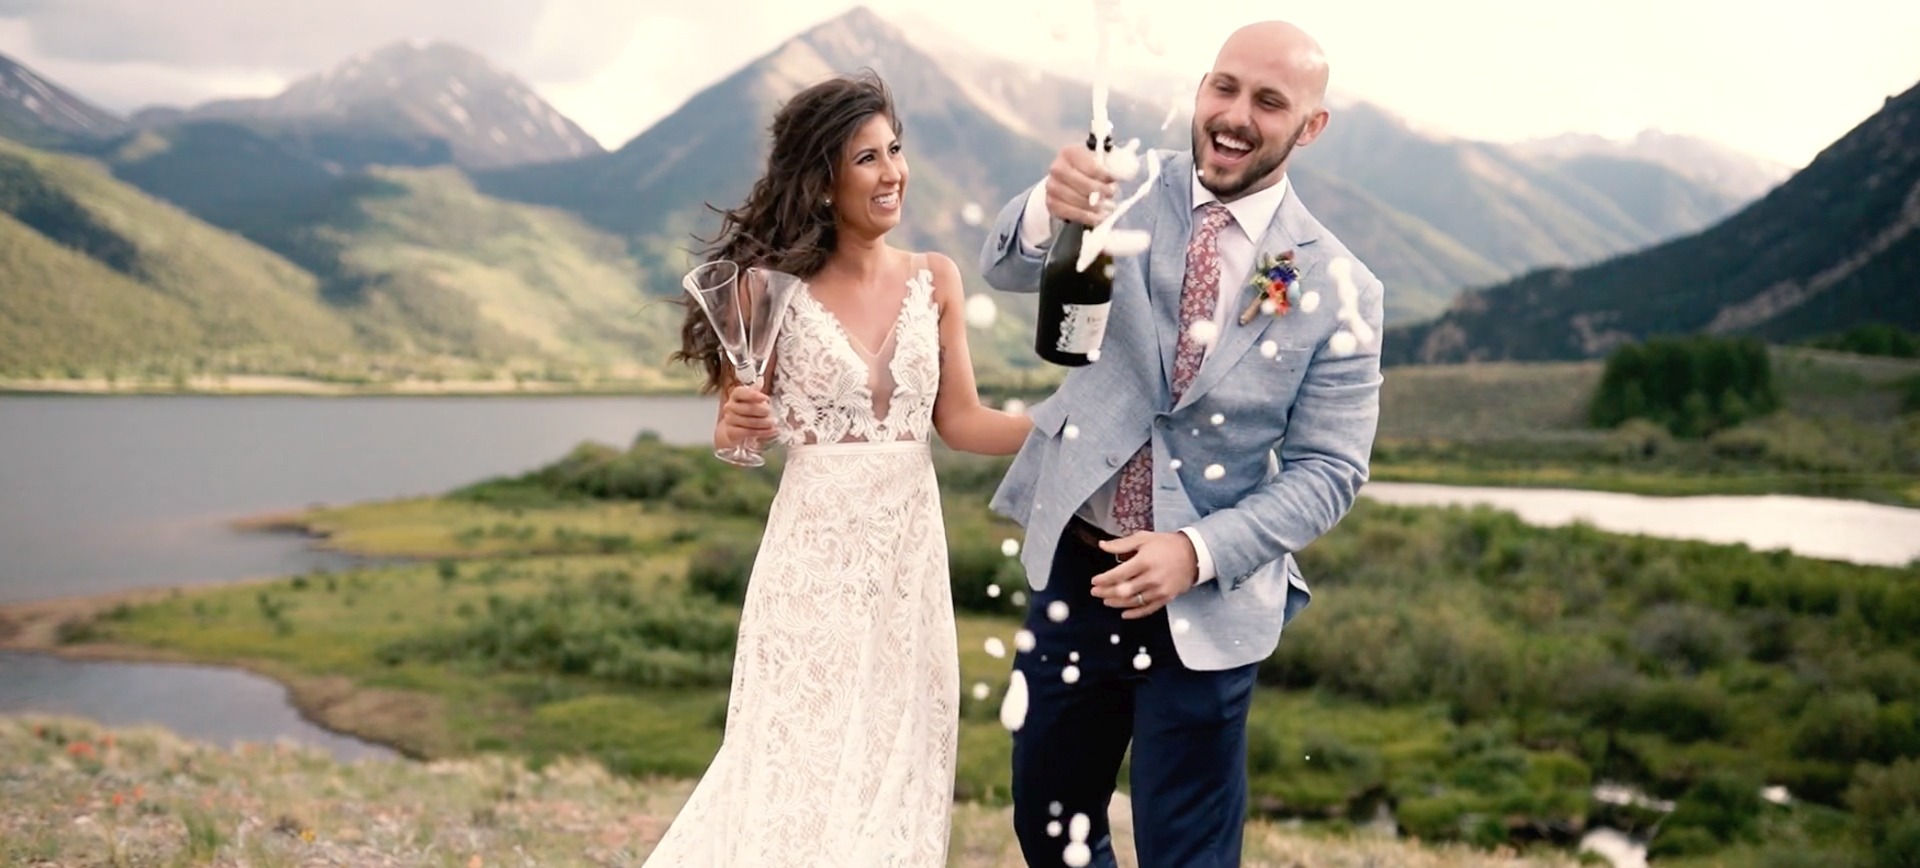 Rocky Mountains Adventure Wedding - bride & groom celebrate with champagne